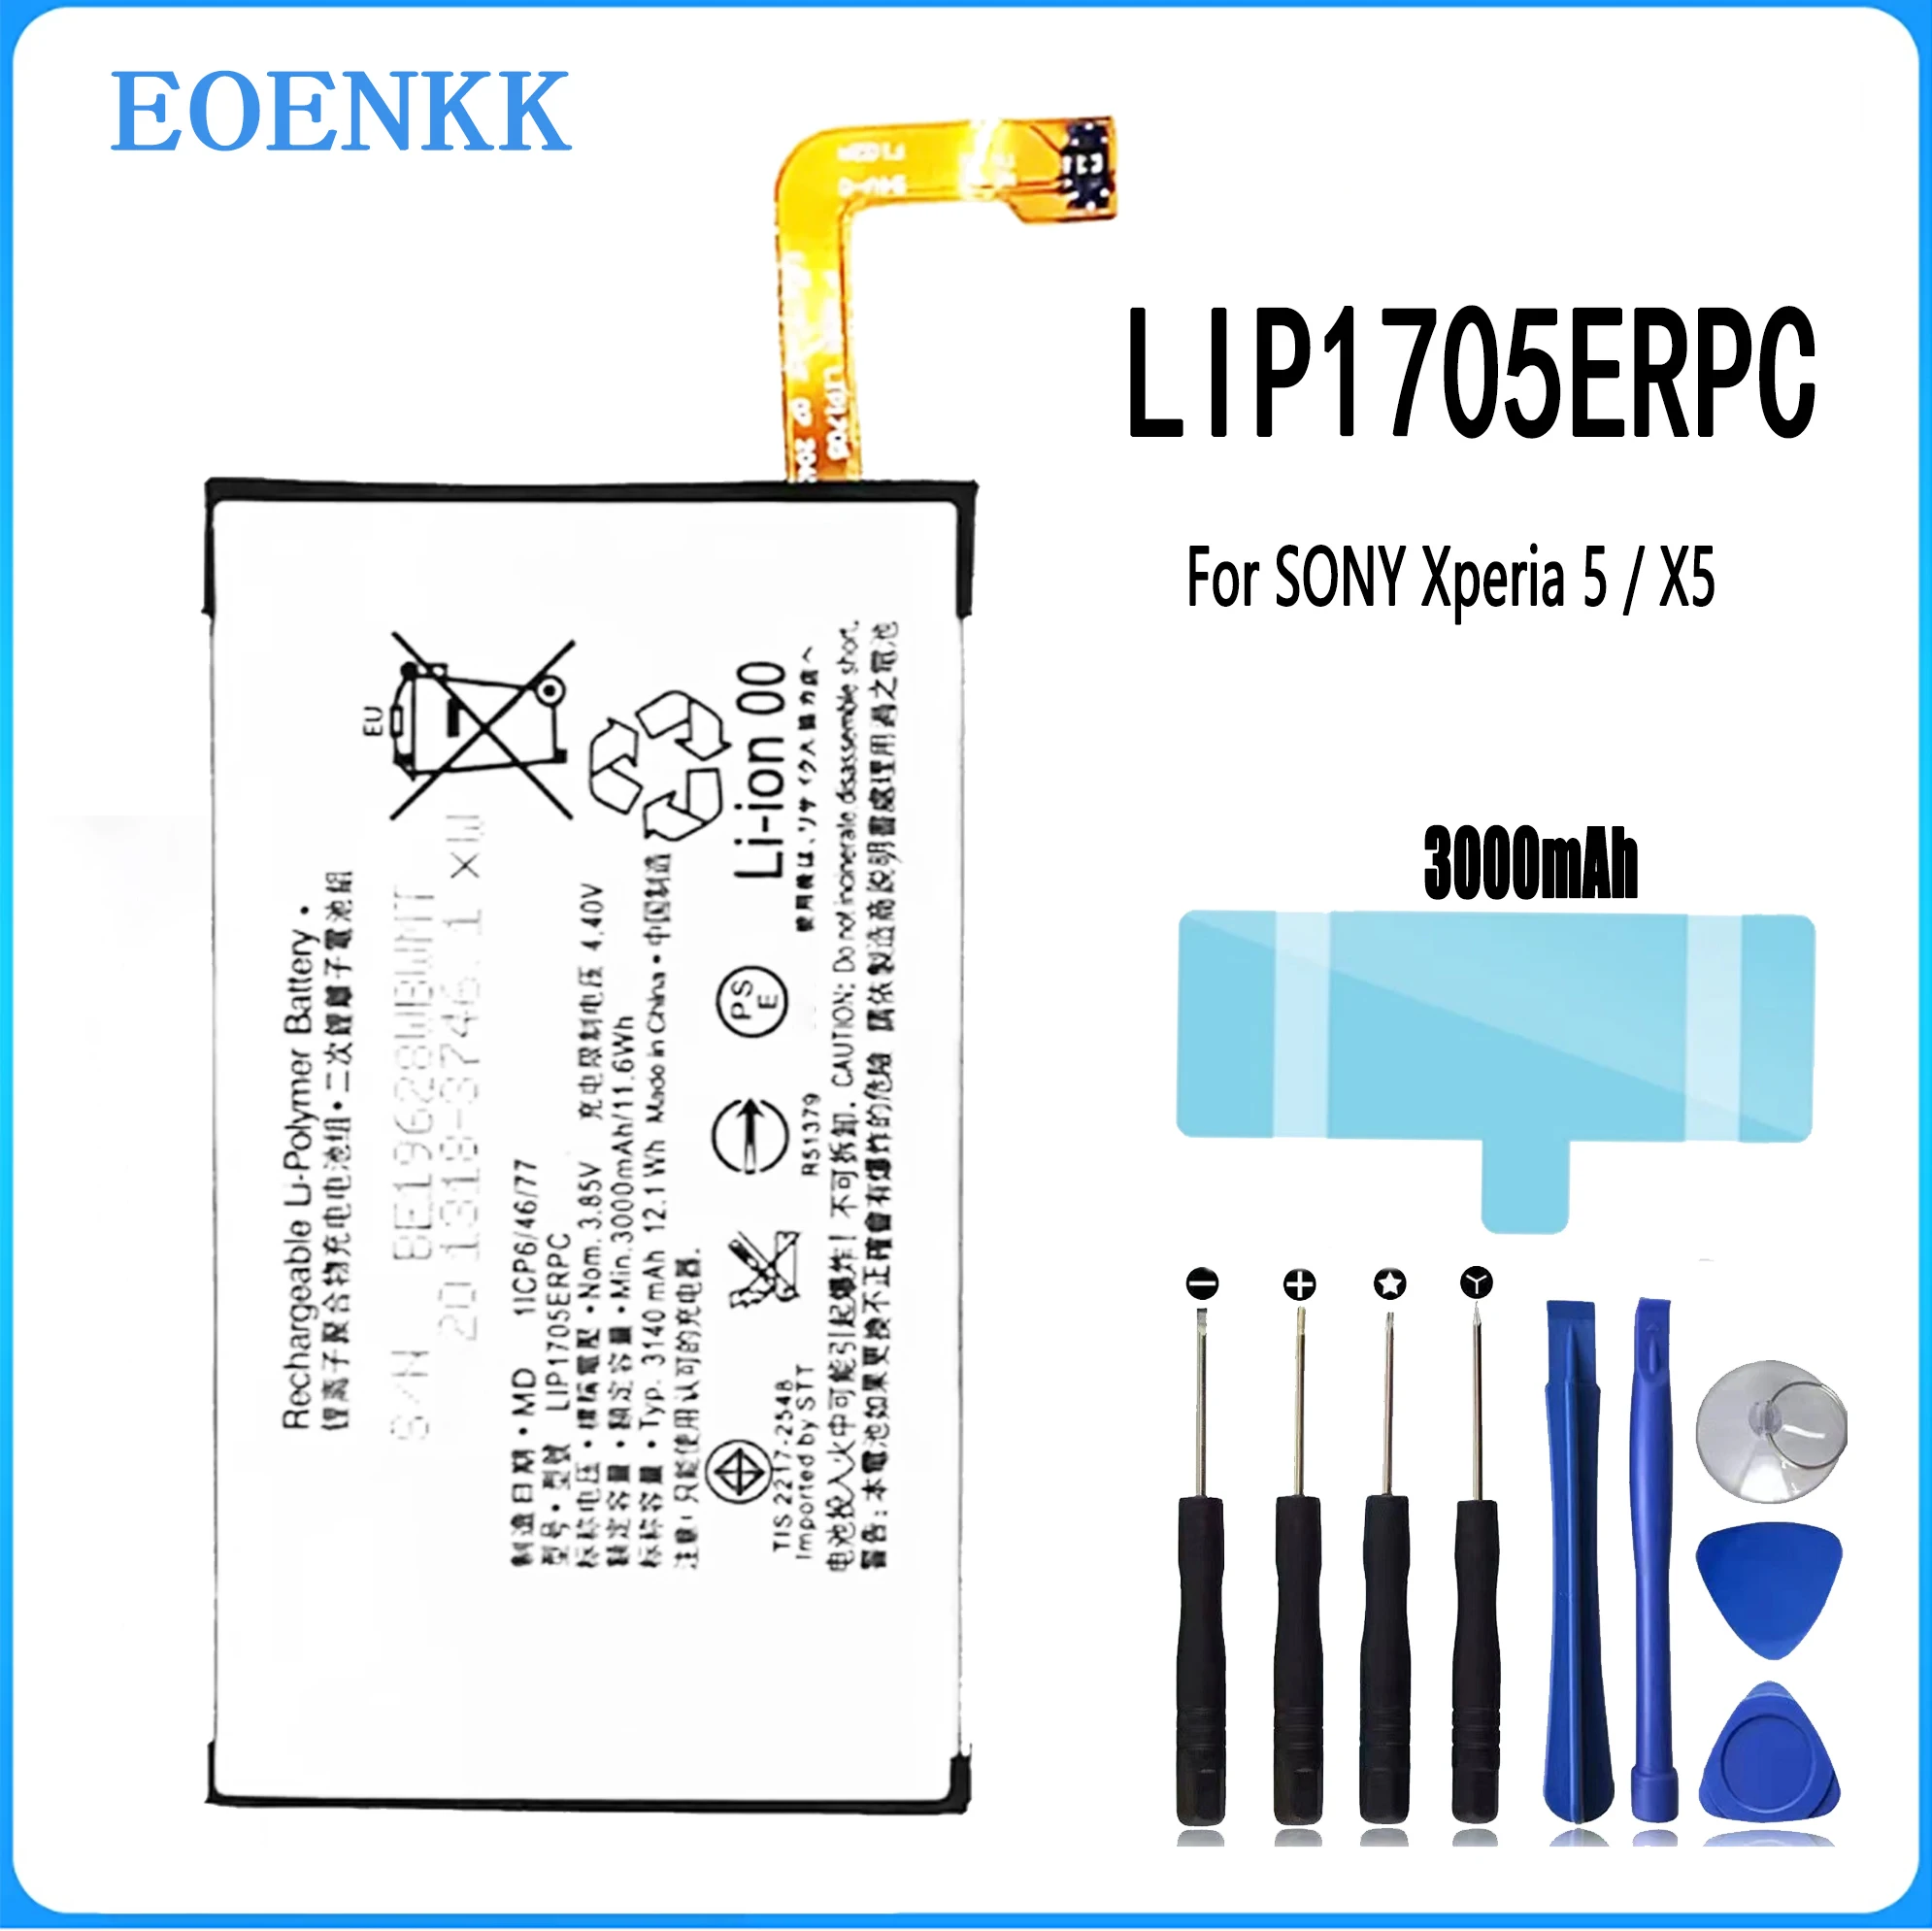 LIP1705ERPC Battery For SONY Xperia 5 / X5 Authentic Phone Replacement Original Capacity Phone Batteries Bateria